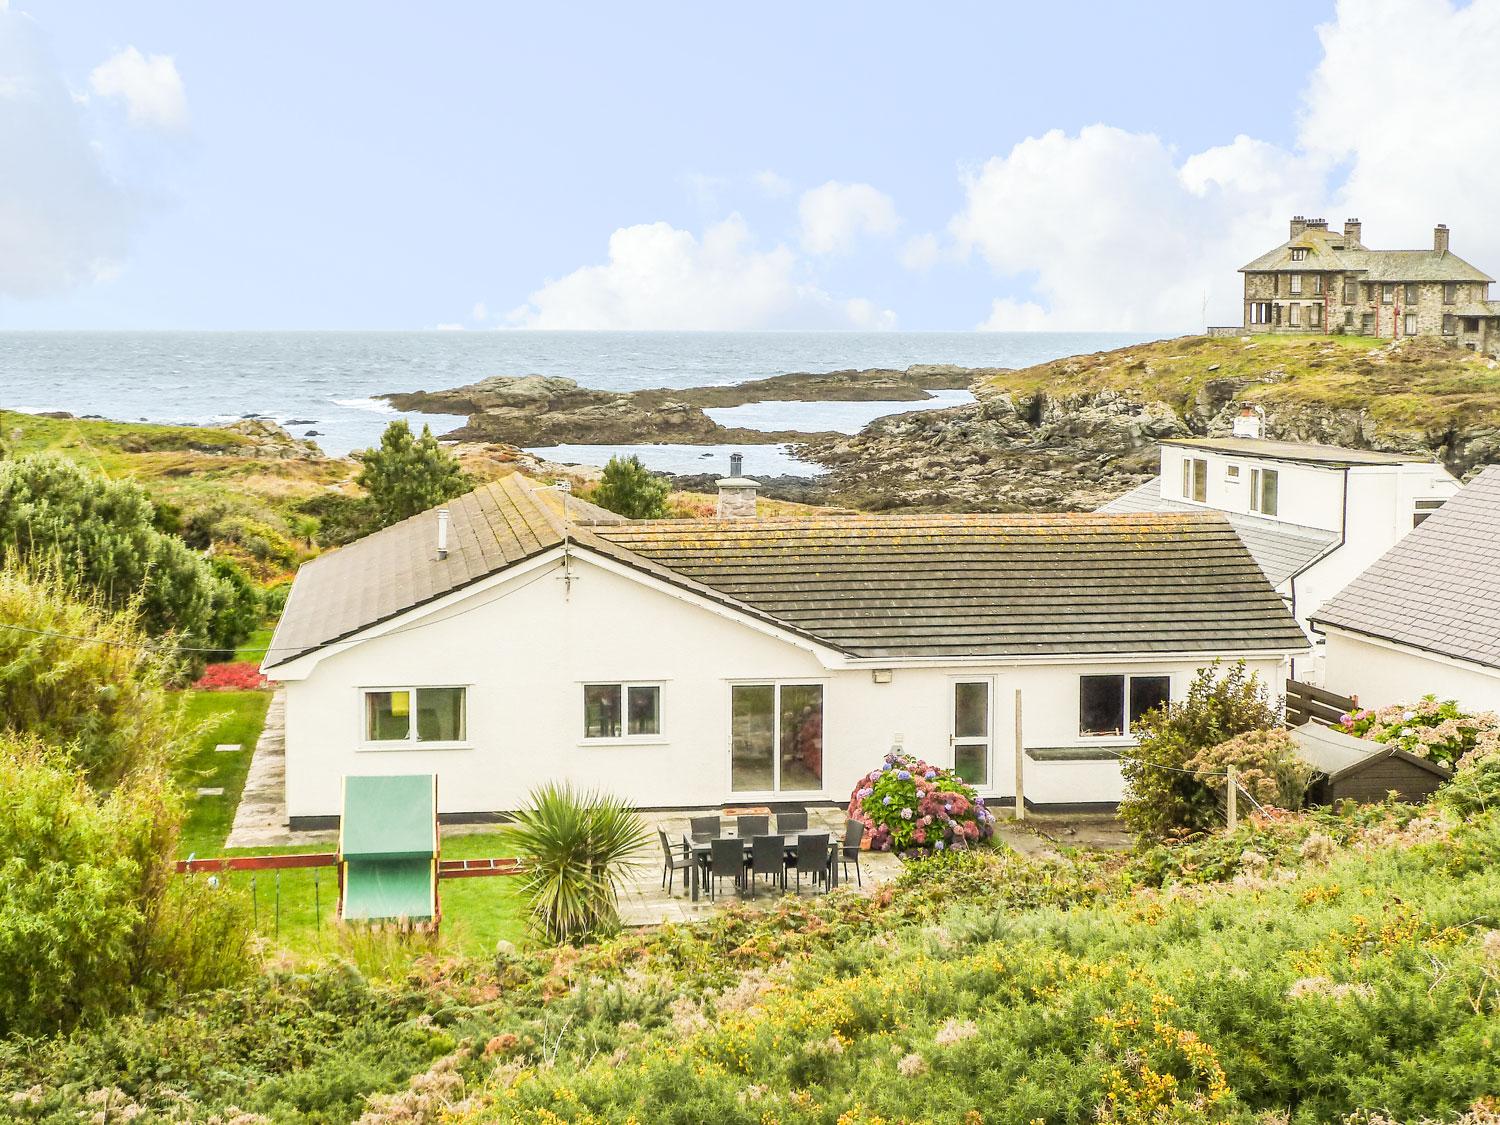 Holiday Cottage Reviews for The Beach House - Self Catering Property in Trearddur Bay, Isle of Anglesey